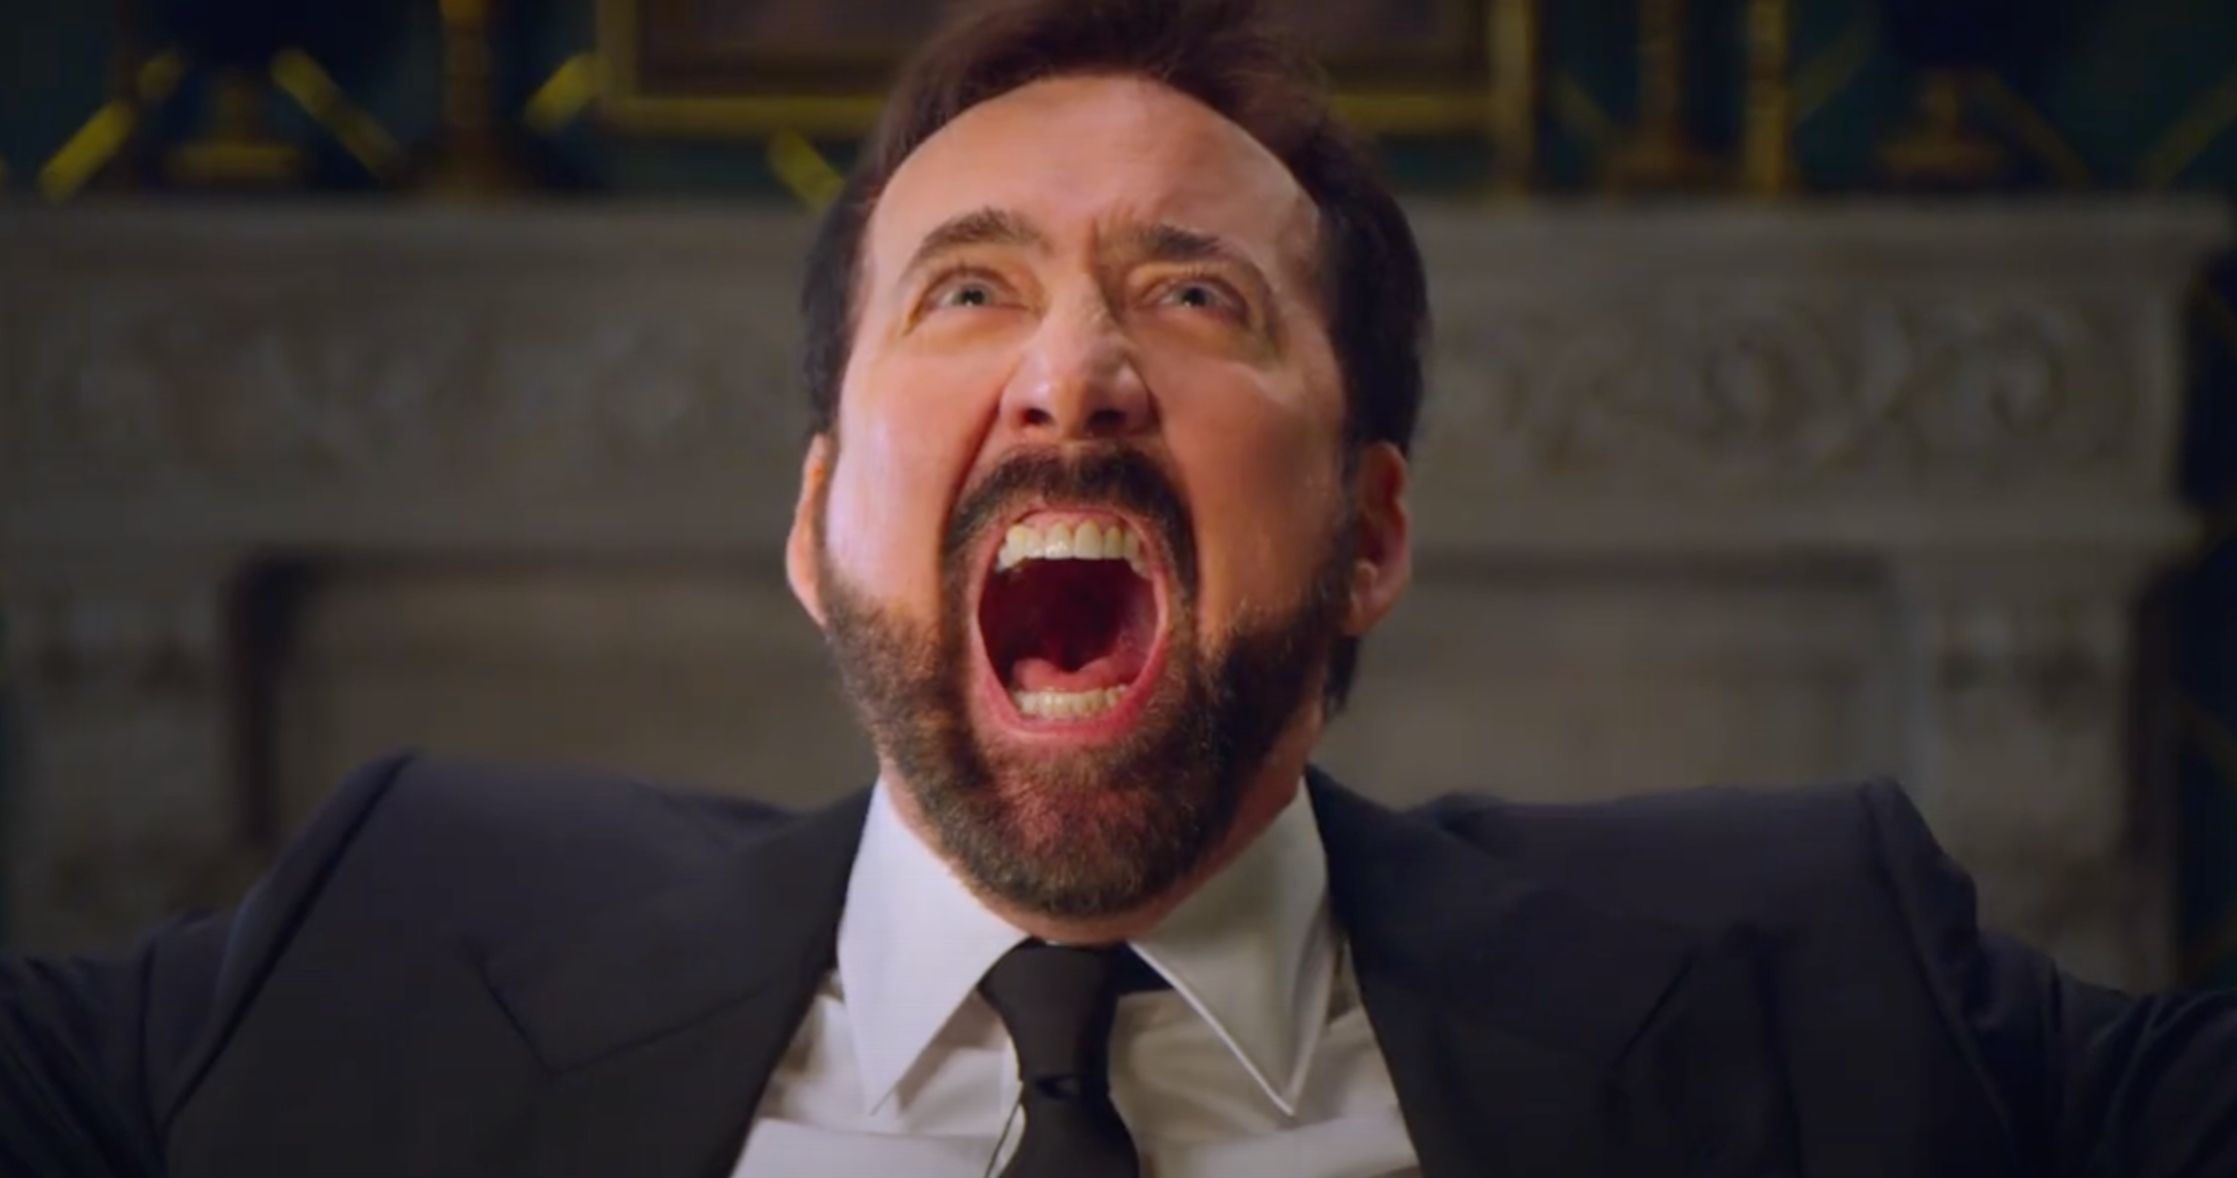 New History of Swear Words Trailer Has Nicolas Cage Cursing Up a Storm on Netflix